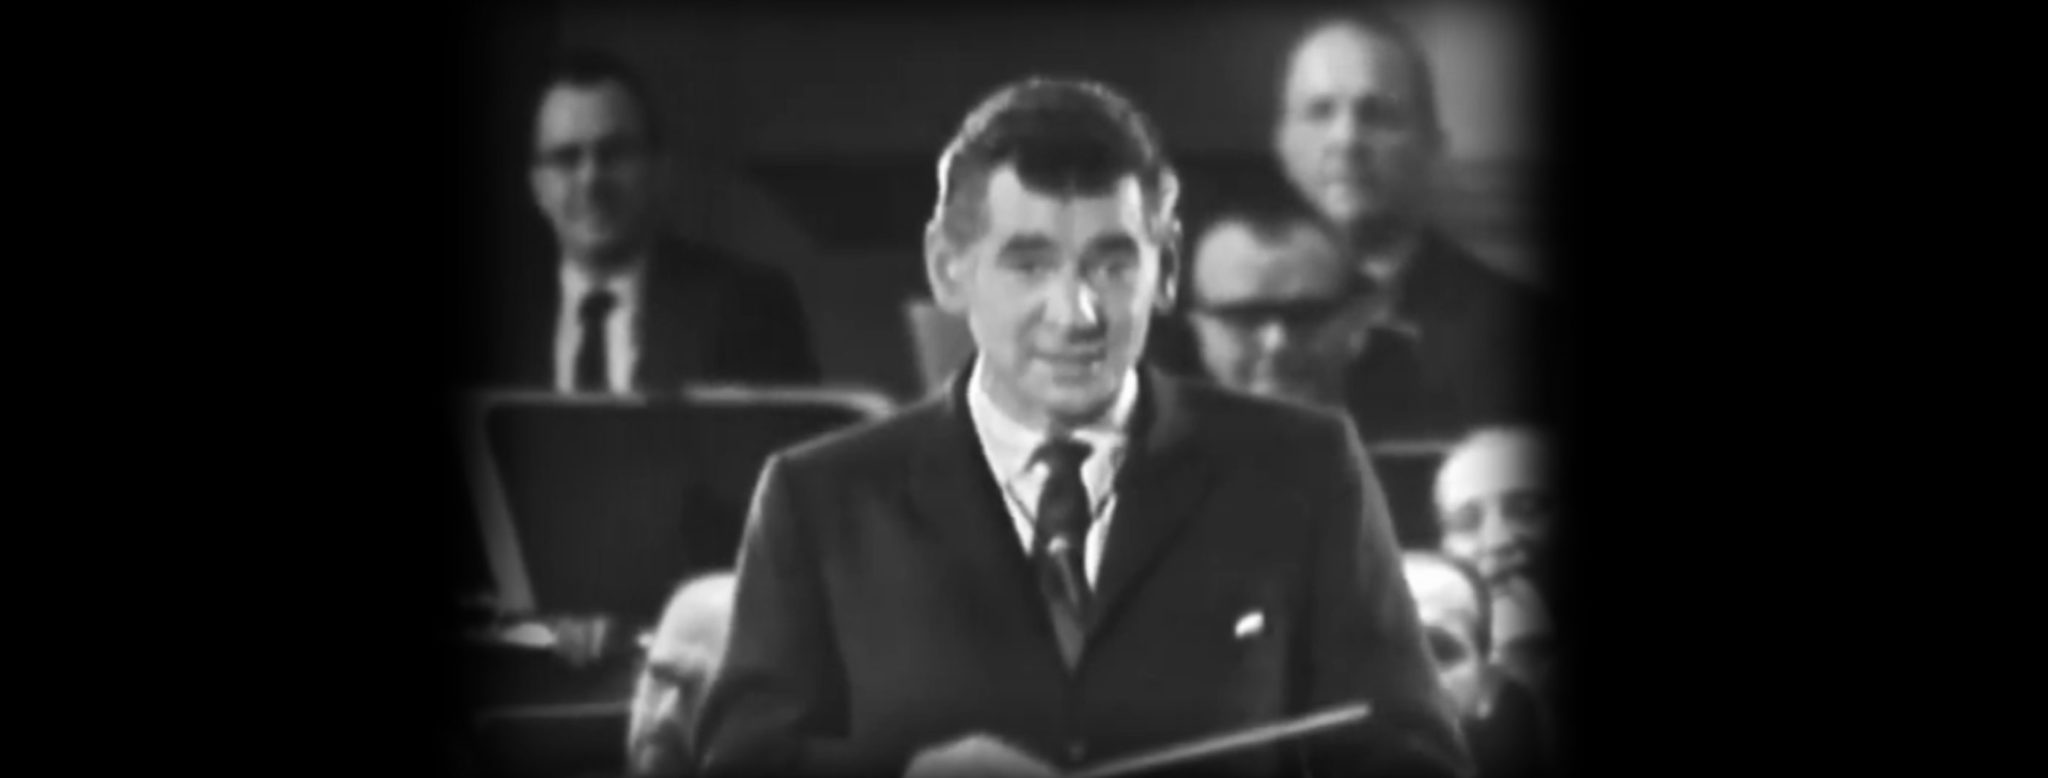 Leonard Bernstein speaks to the audience in the Young People's Concert titled "Humor in Music." (Credit: Leonard Bernstein Office, Inc.)